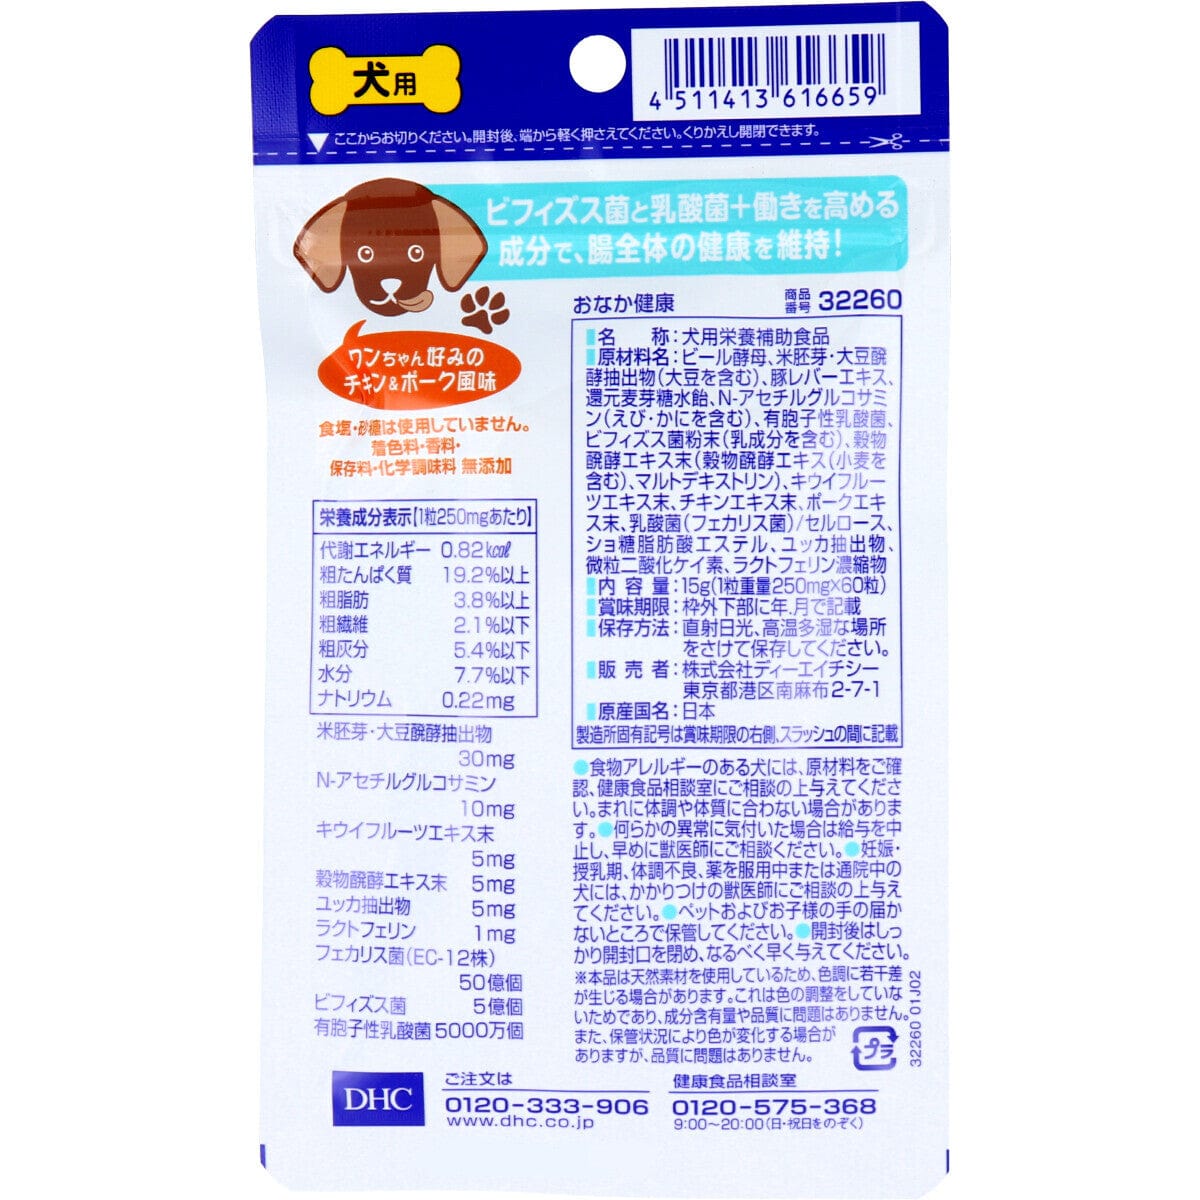 DHC - Stomach Intestinal Health Food Supplement for Pet Dogs (60 Tablets) -  Pet Dog Supplements  Durio.sg